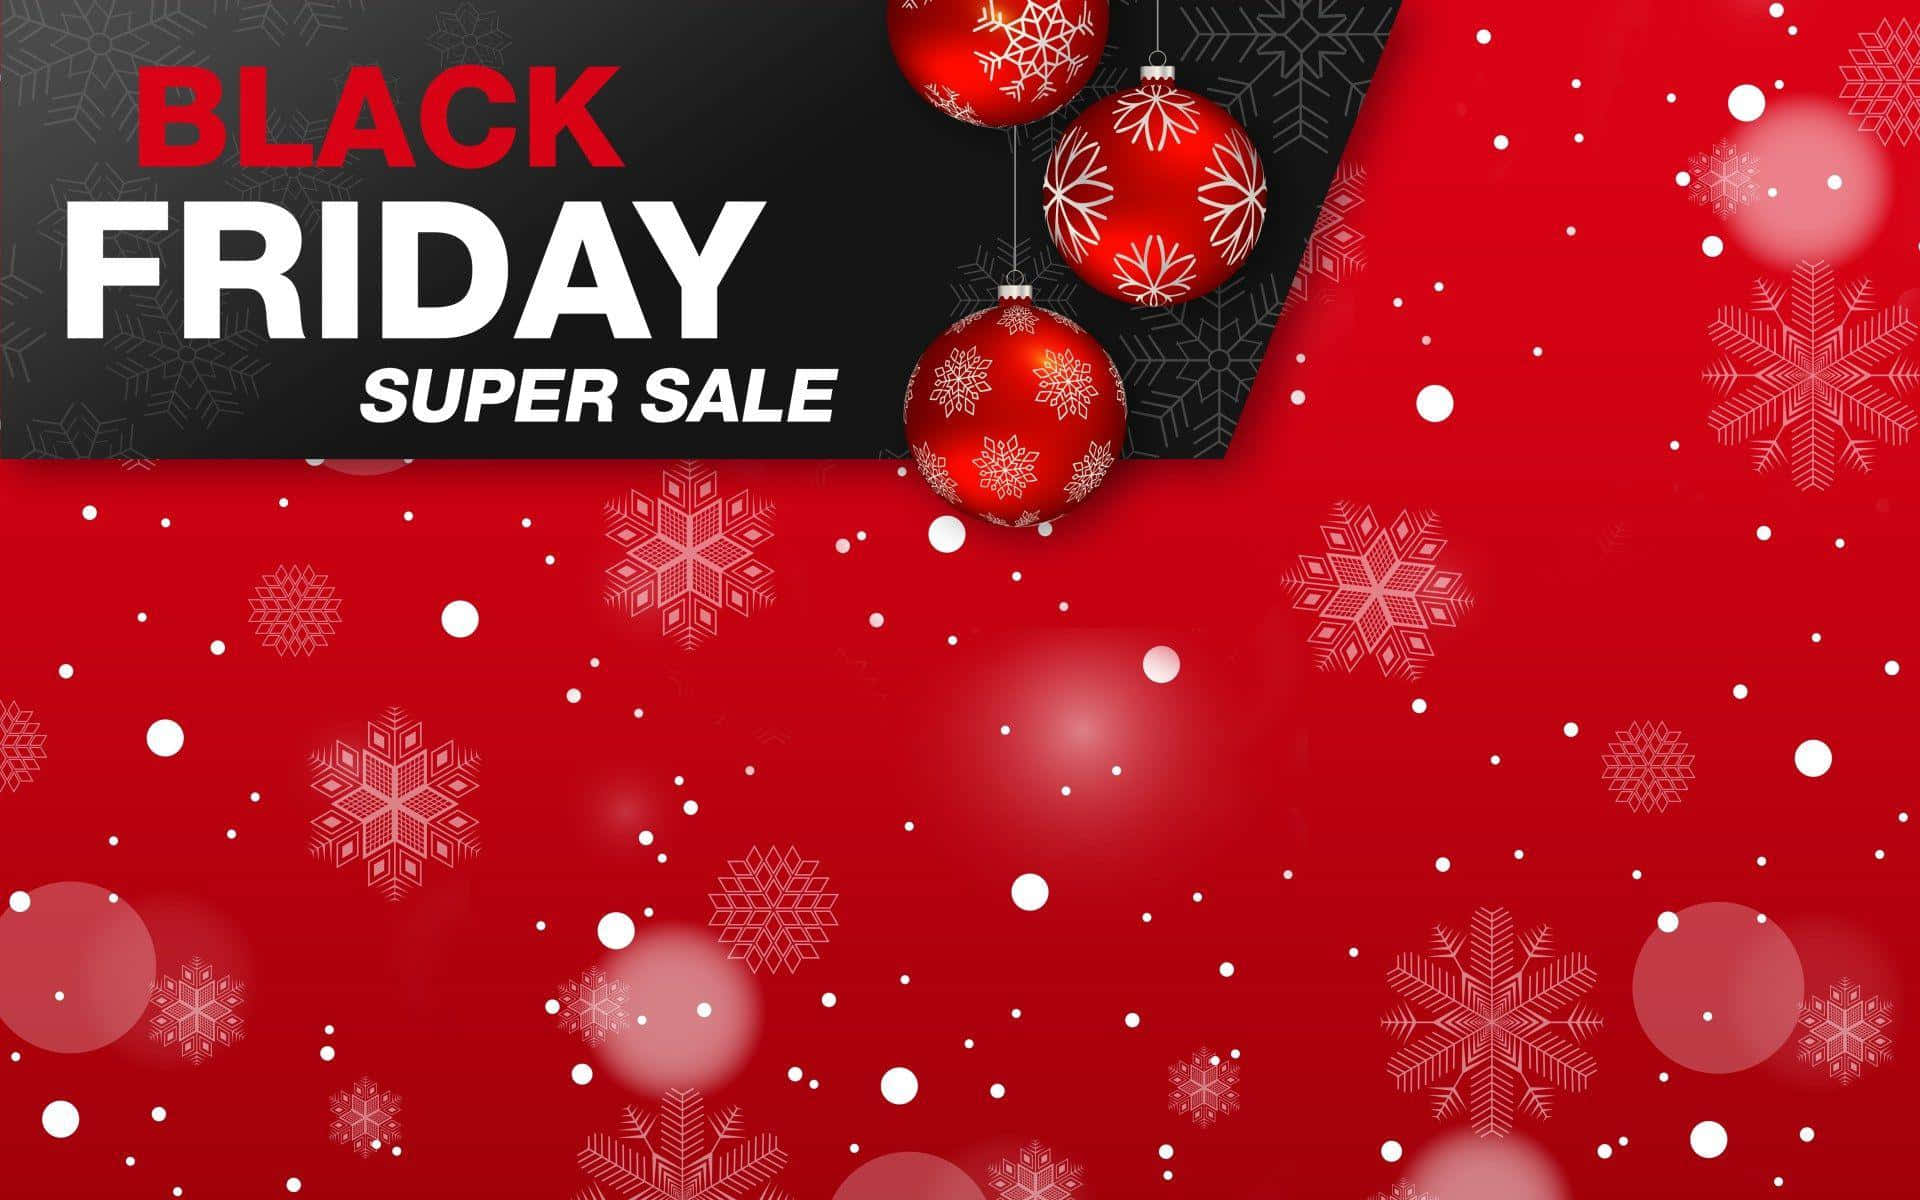 Black Friday Super Sale Banner With Snowflakes And Christmas Balls